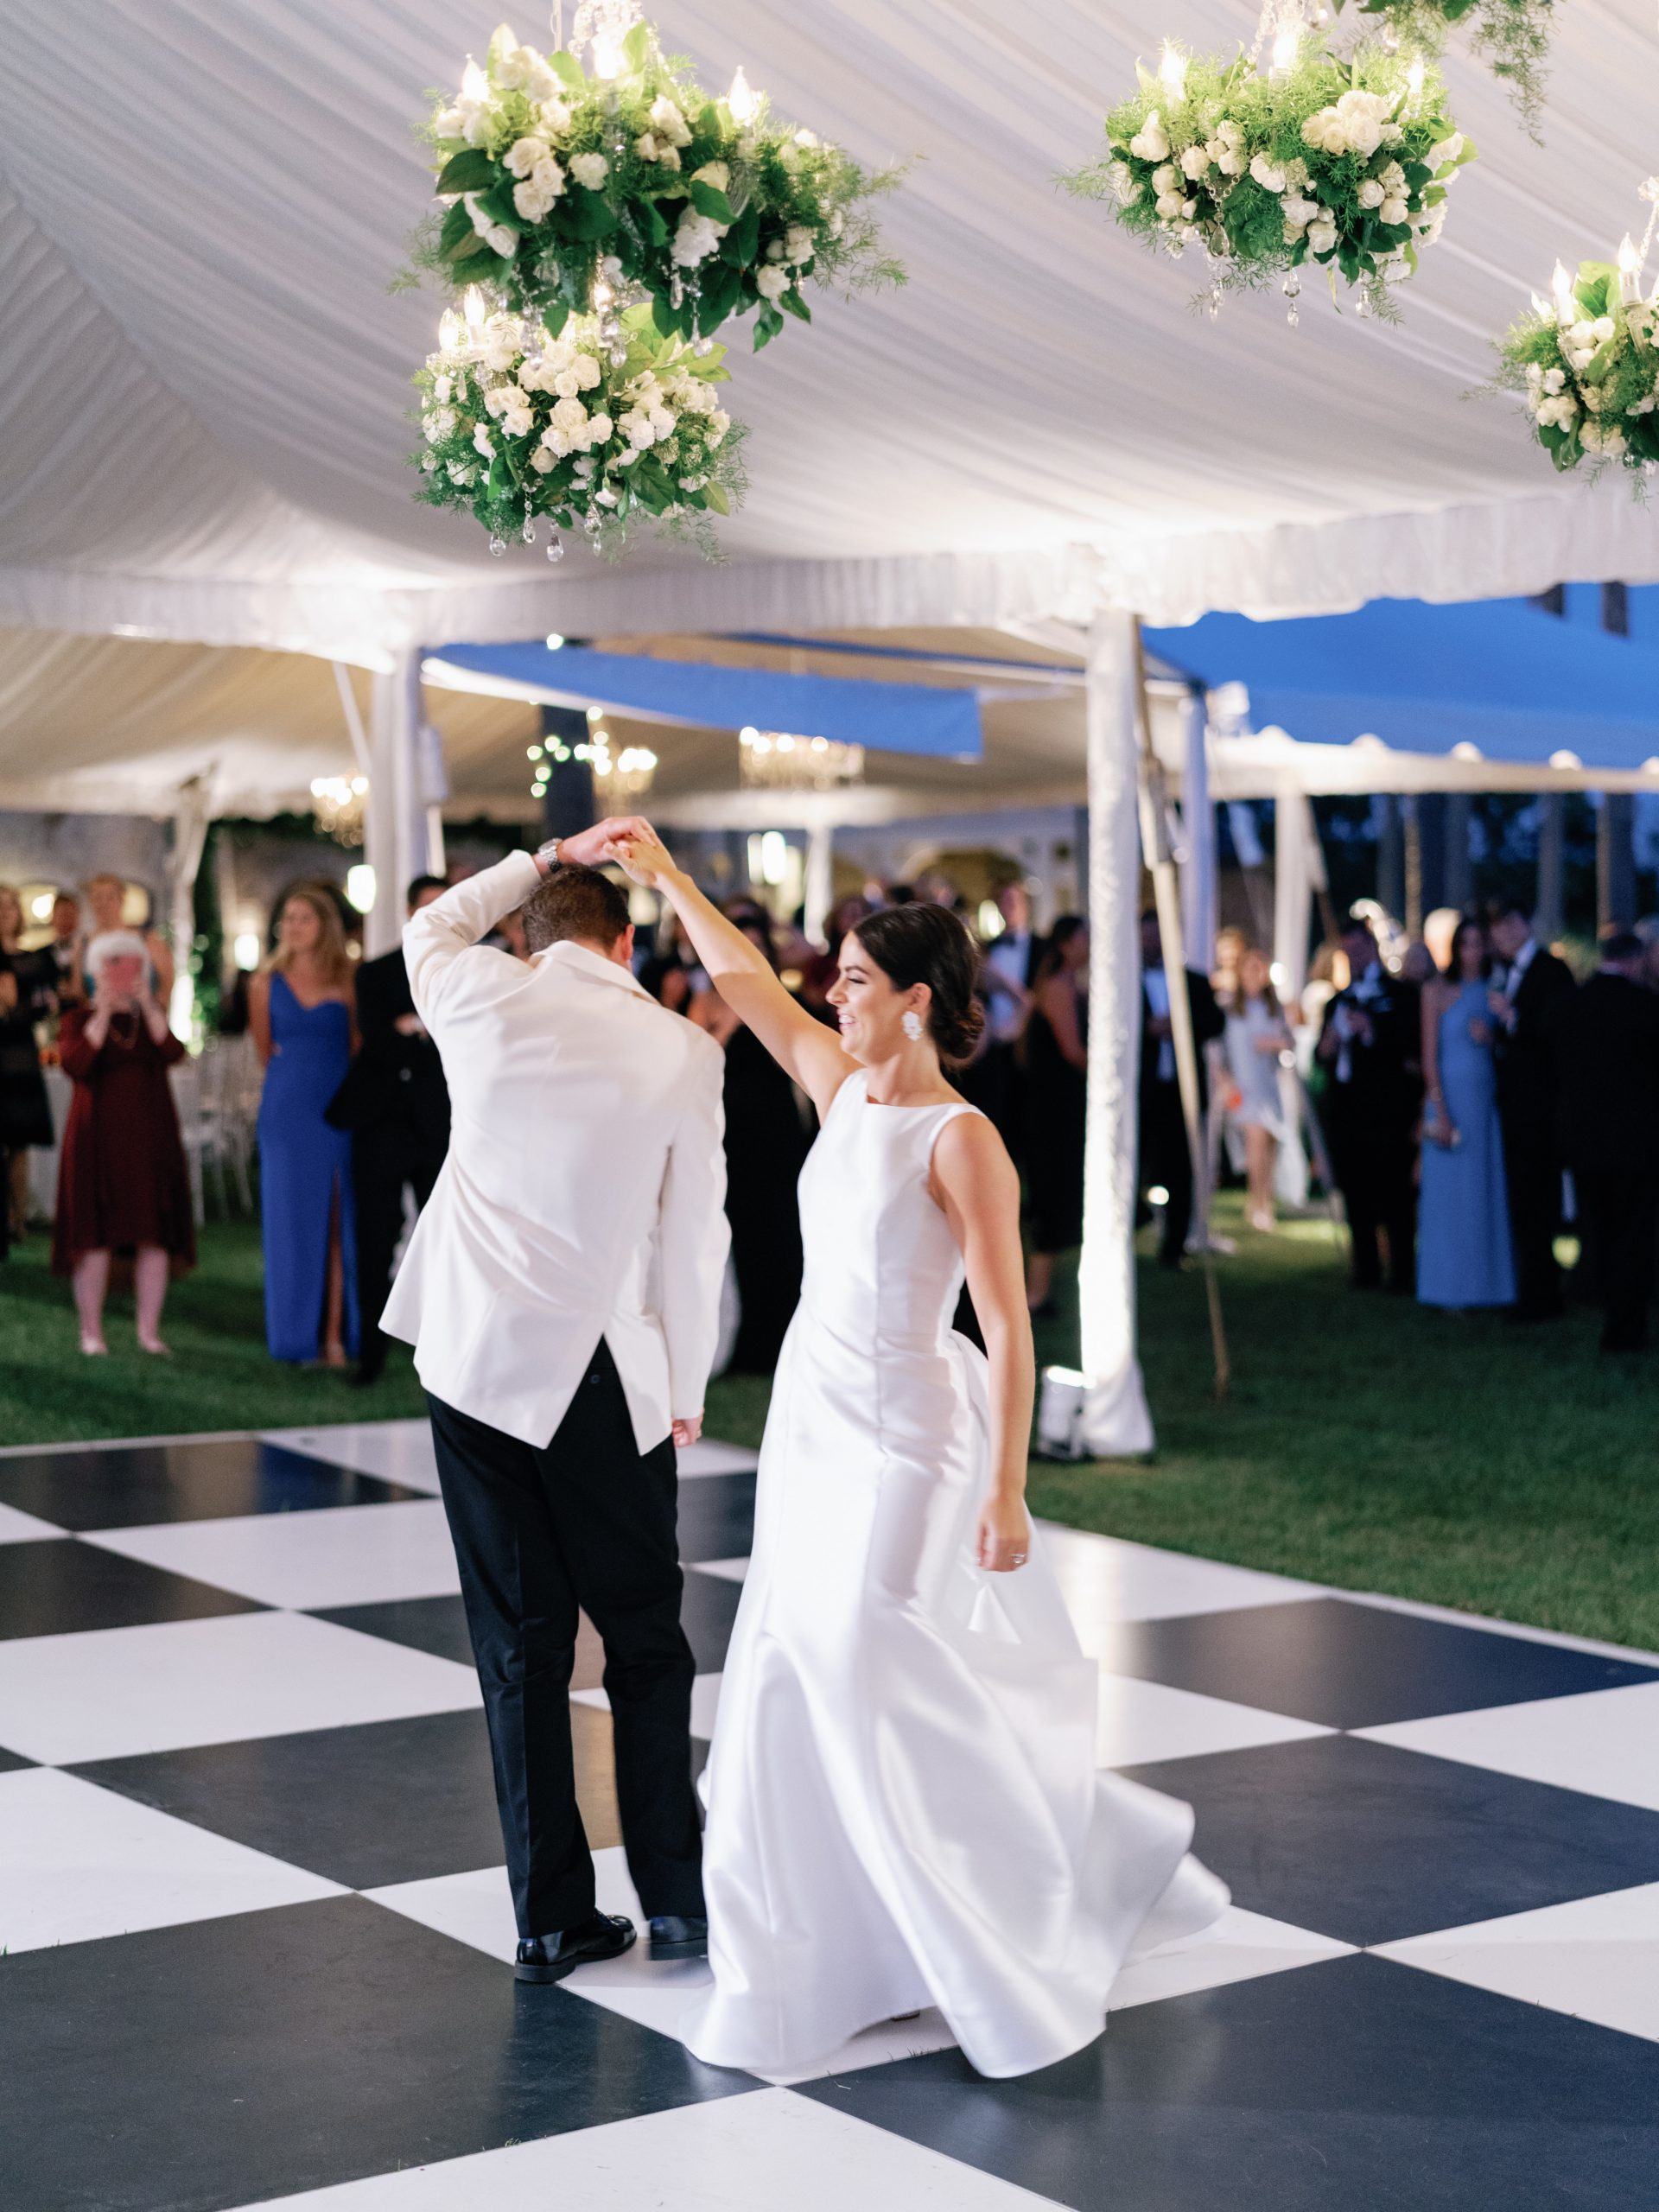 The couple’s first dance was to “Consider Me” by Alan Stone, a song they both loved. Jordan says that the lyrics were perfect for them, reminding them to make the deliberate choice to love each other every day. 
